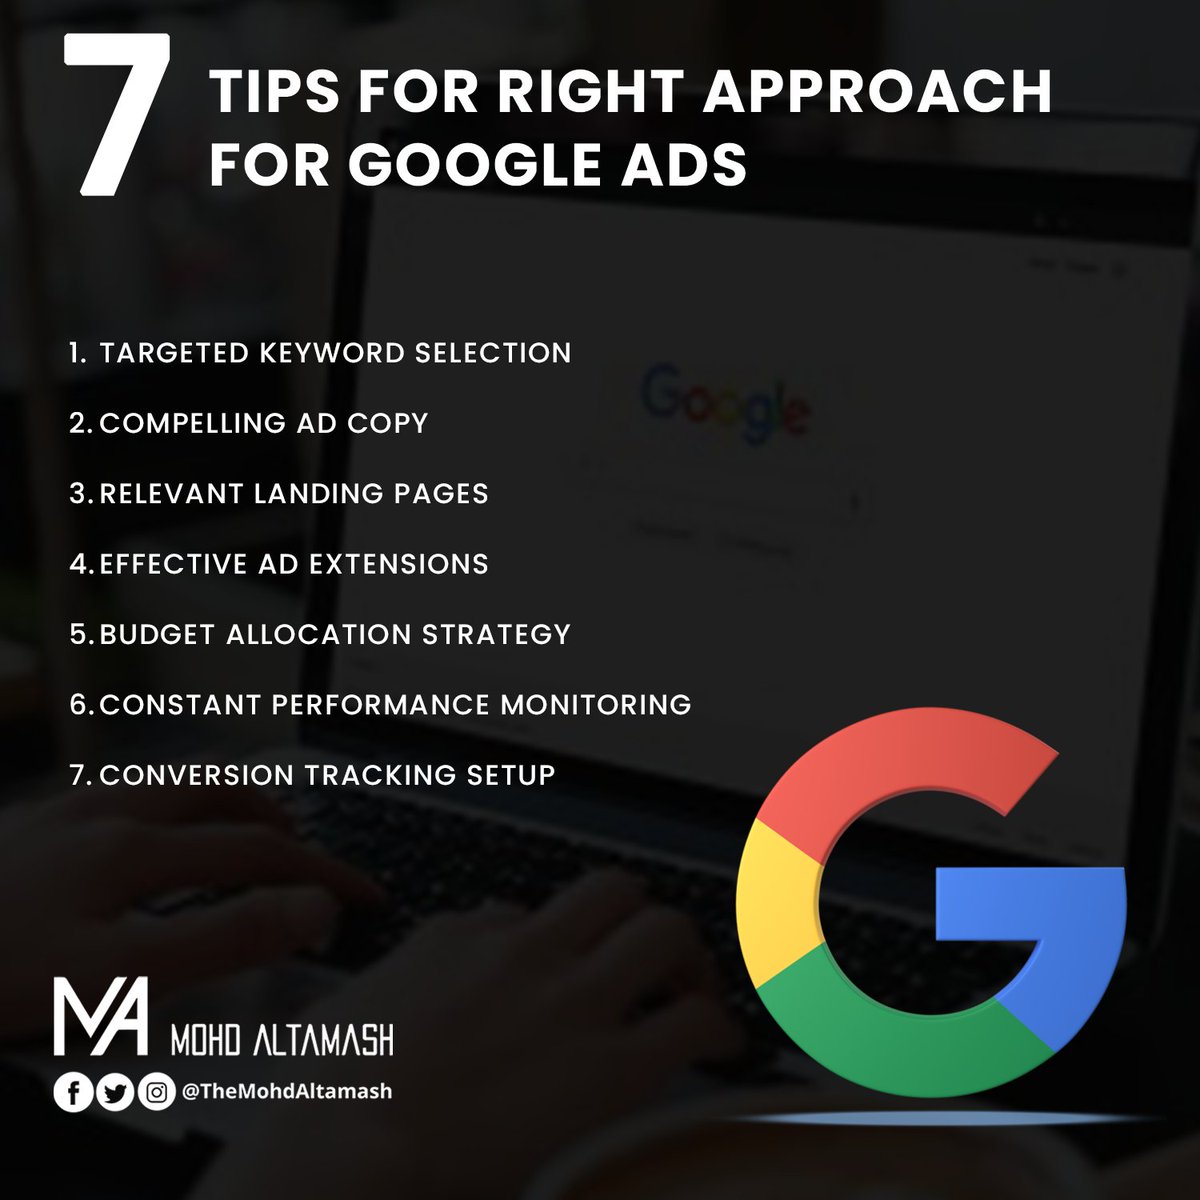 Here are tips to ensure you have the right approach for success

#GoogleAds #PPCAdvertising #DigitalMarketing #AdCampaigns #AdWords #PaidAdvertising #SearchAdvertising #AdWordsStrategy #OnlineAdvertising #ROI #ConversionTracking #Remarketing #AdOptimization